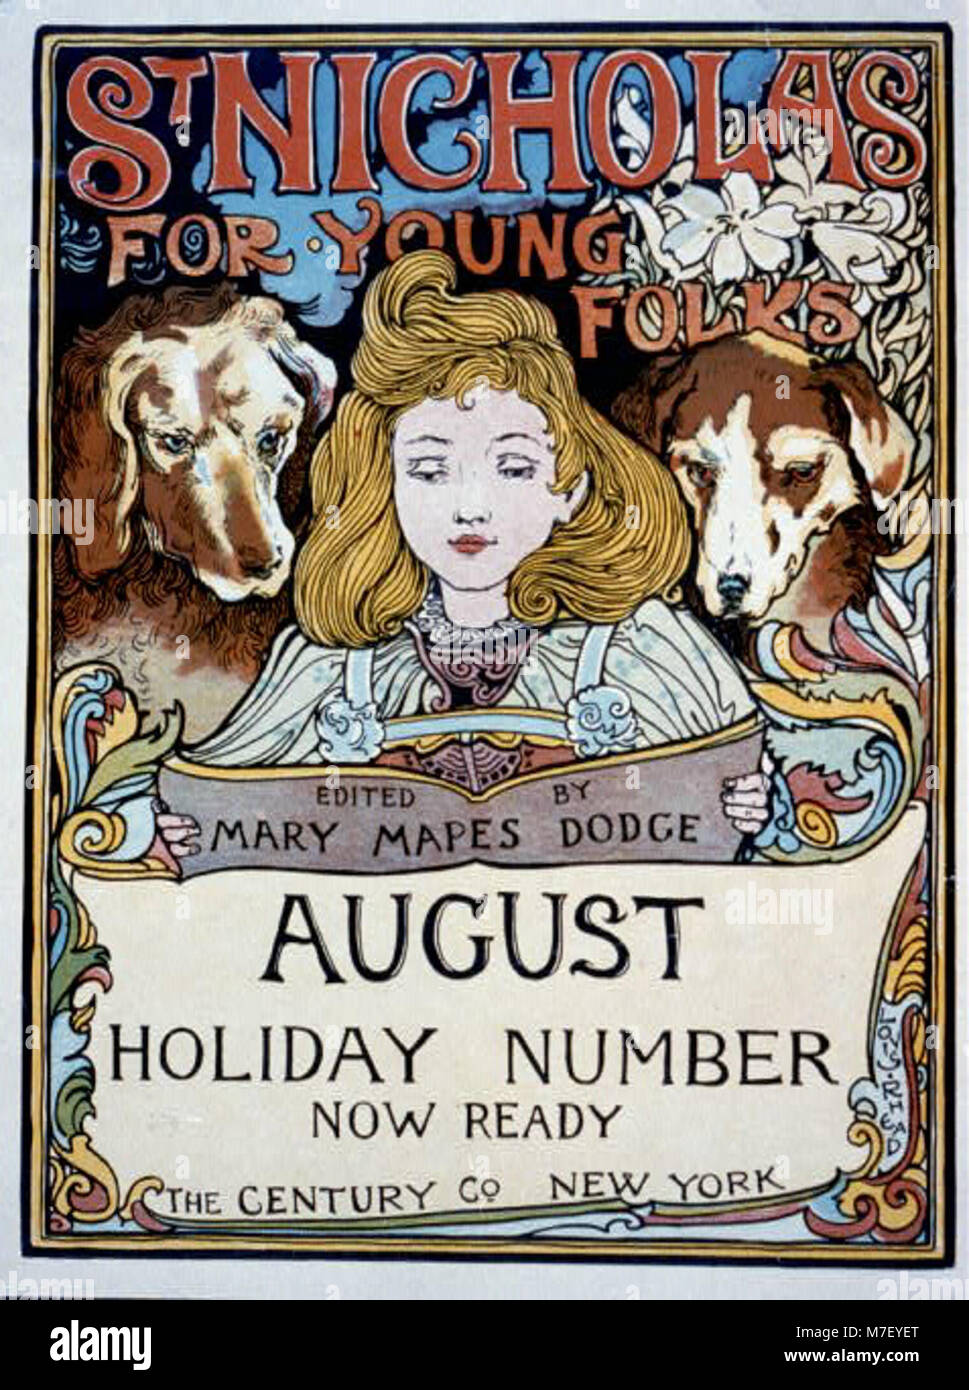 St. Nicholas for young folks, edited by Mary Mapes Dodge, August holiday number now ready - The Century Co., New York - Louis Rhead LCCN2002721207 Stock Photo